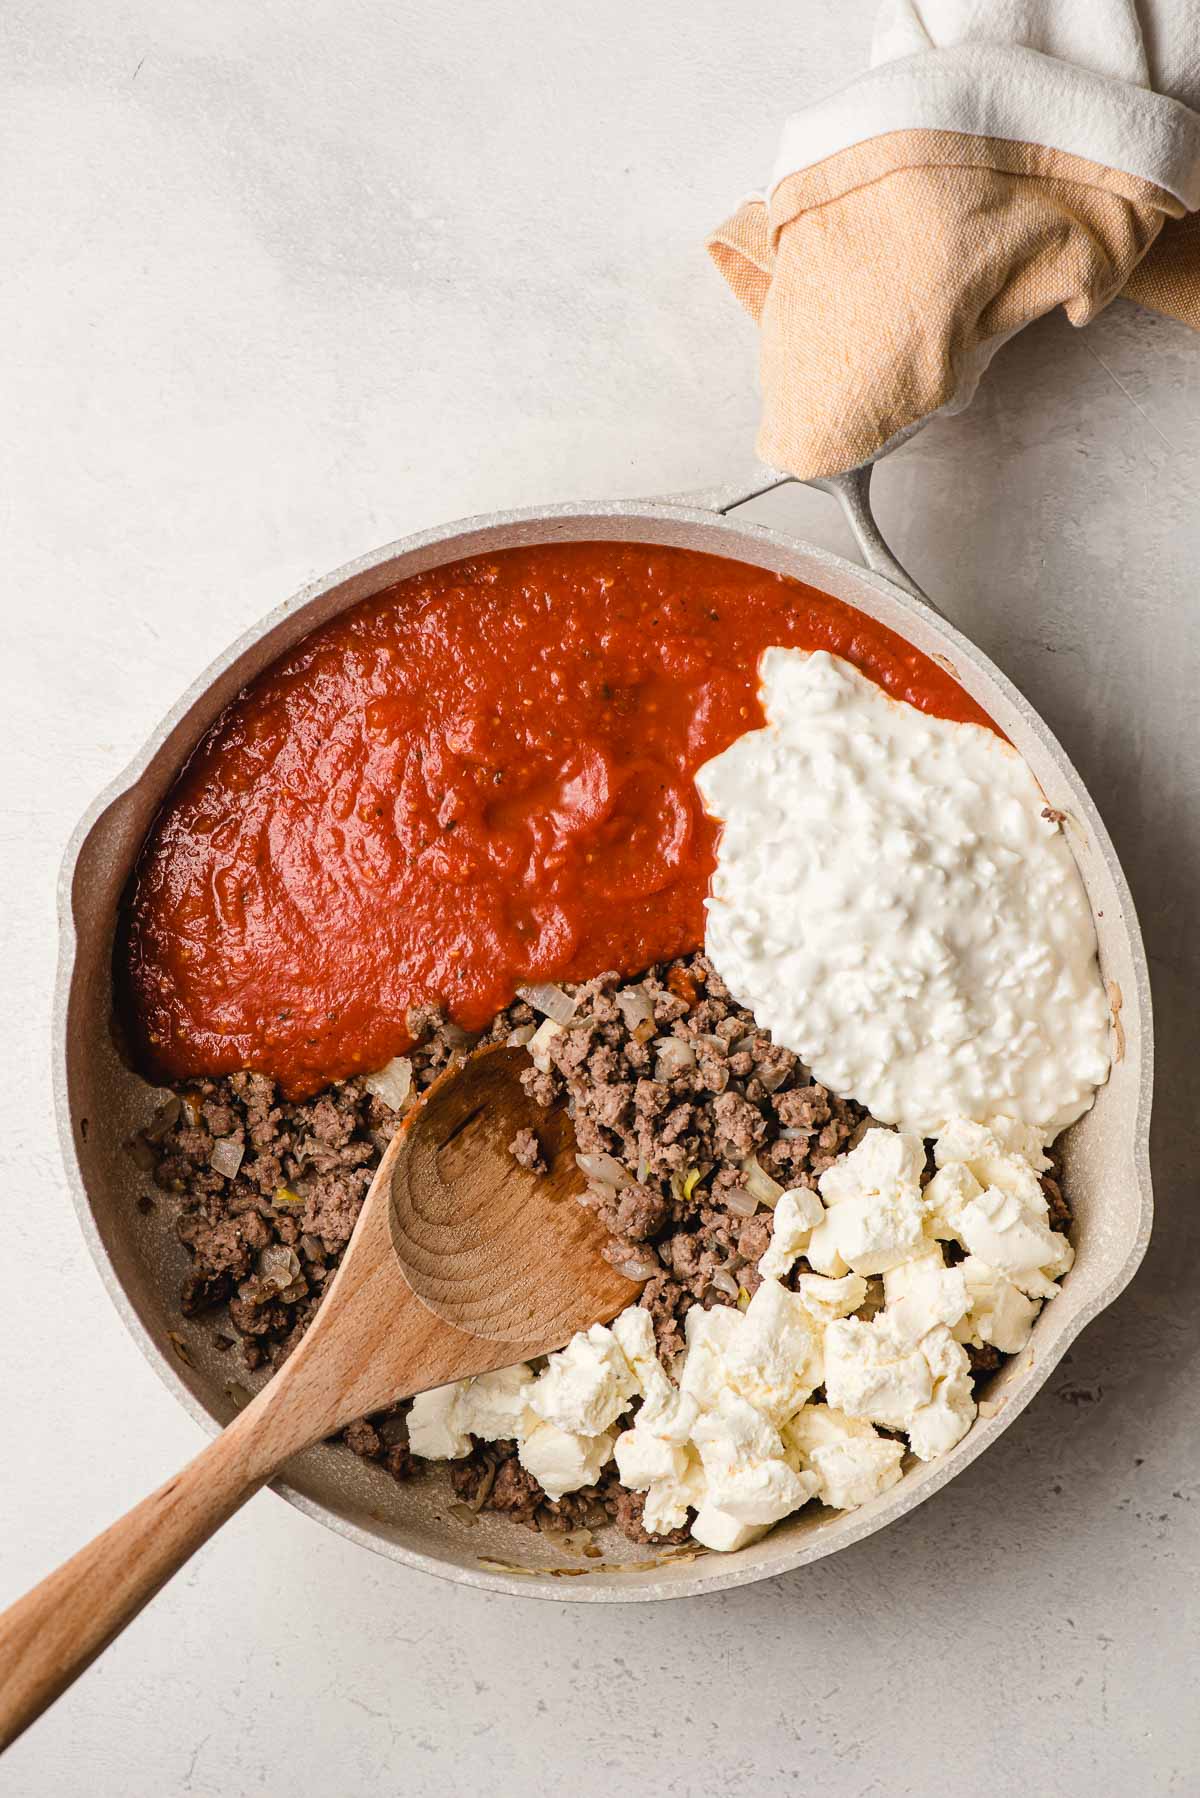 Skillet with sauteed ground beef mixture, tomato sauce, cottage cheese, and cubed cream cheese.